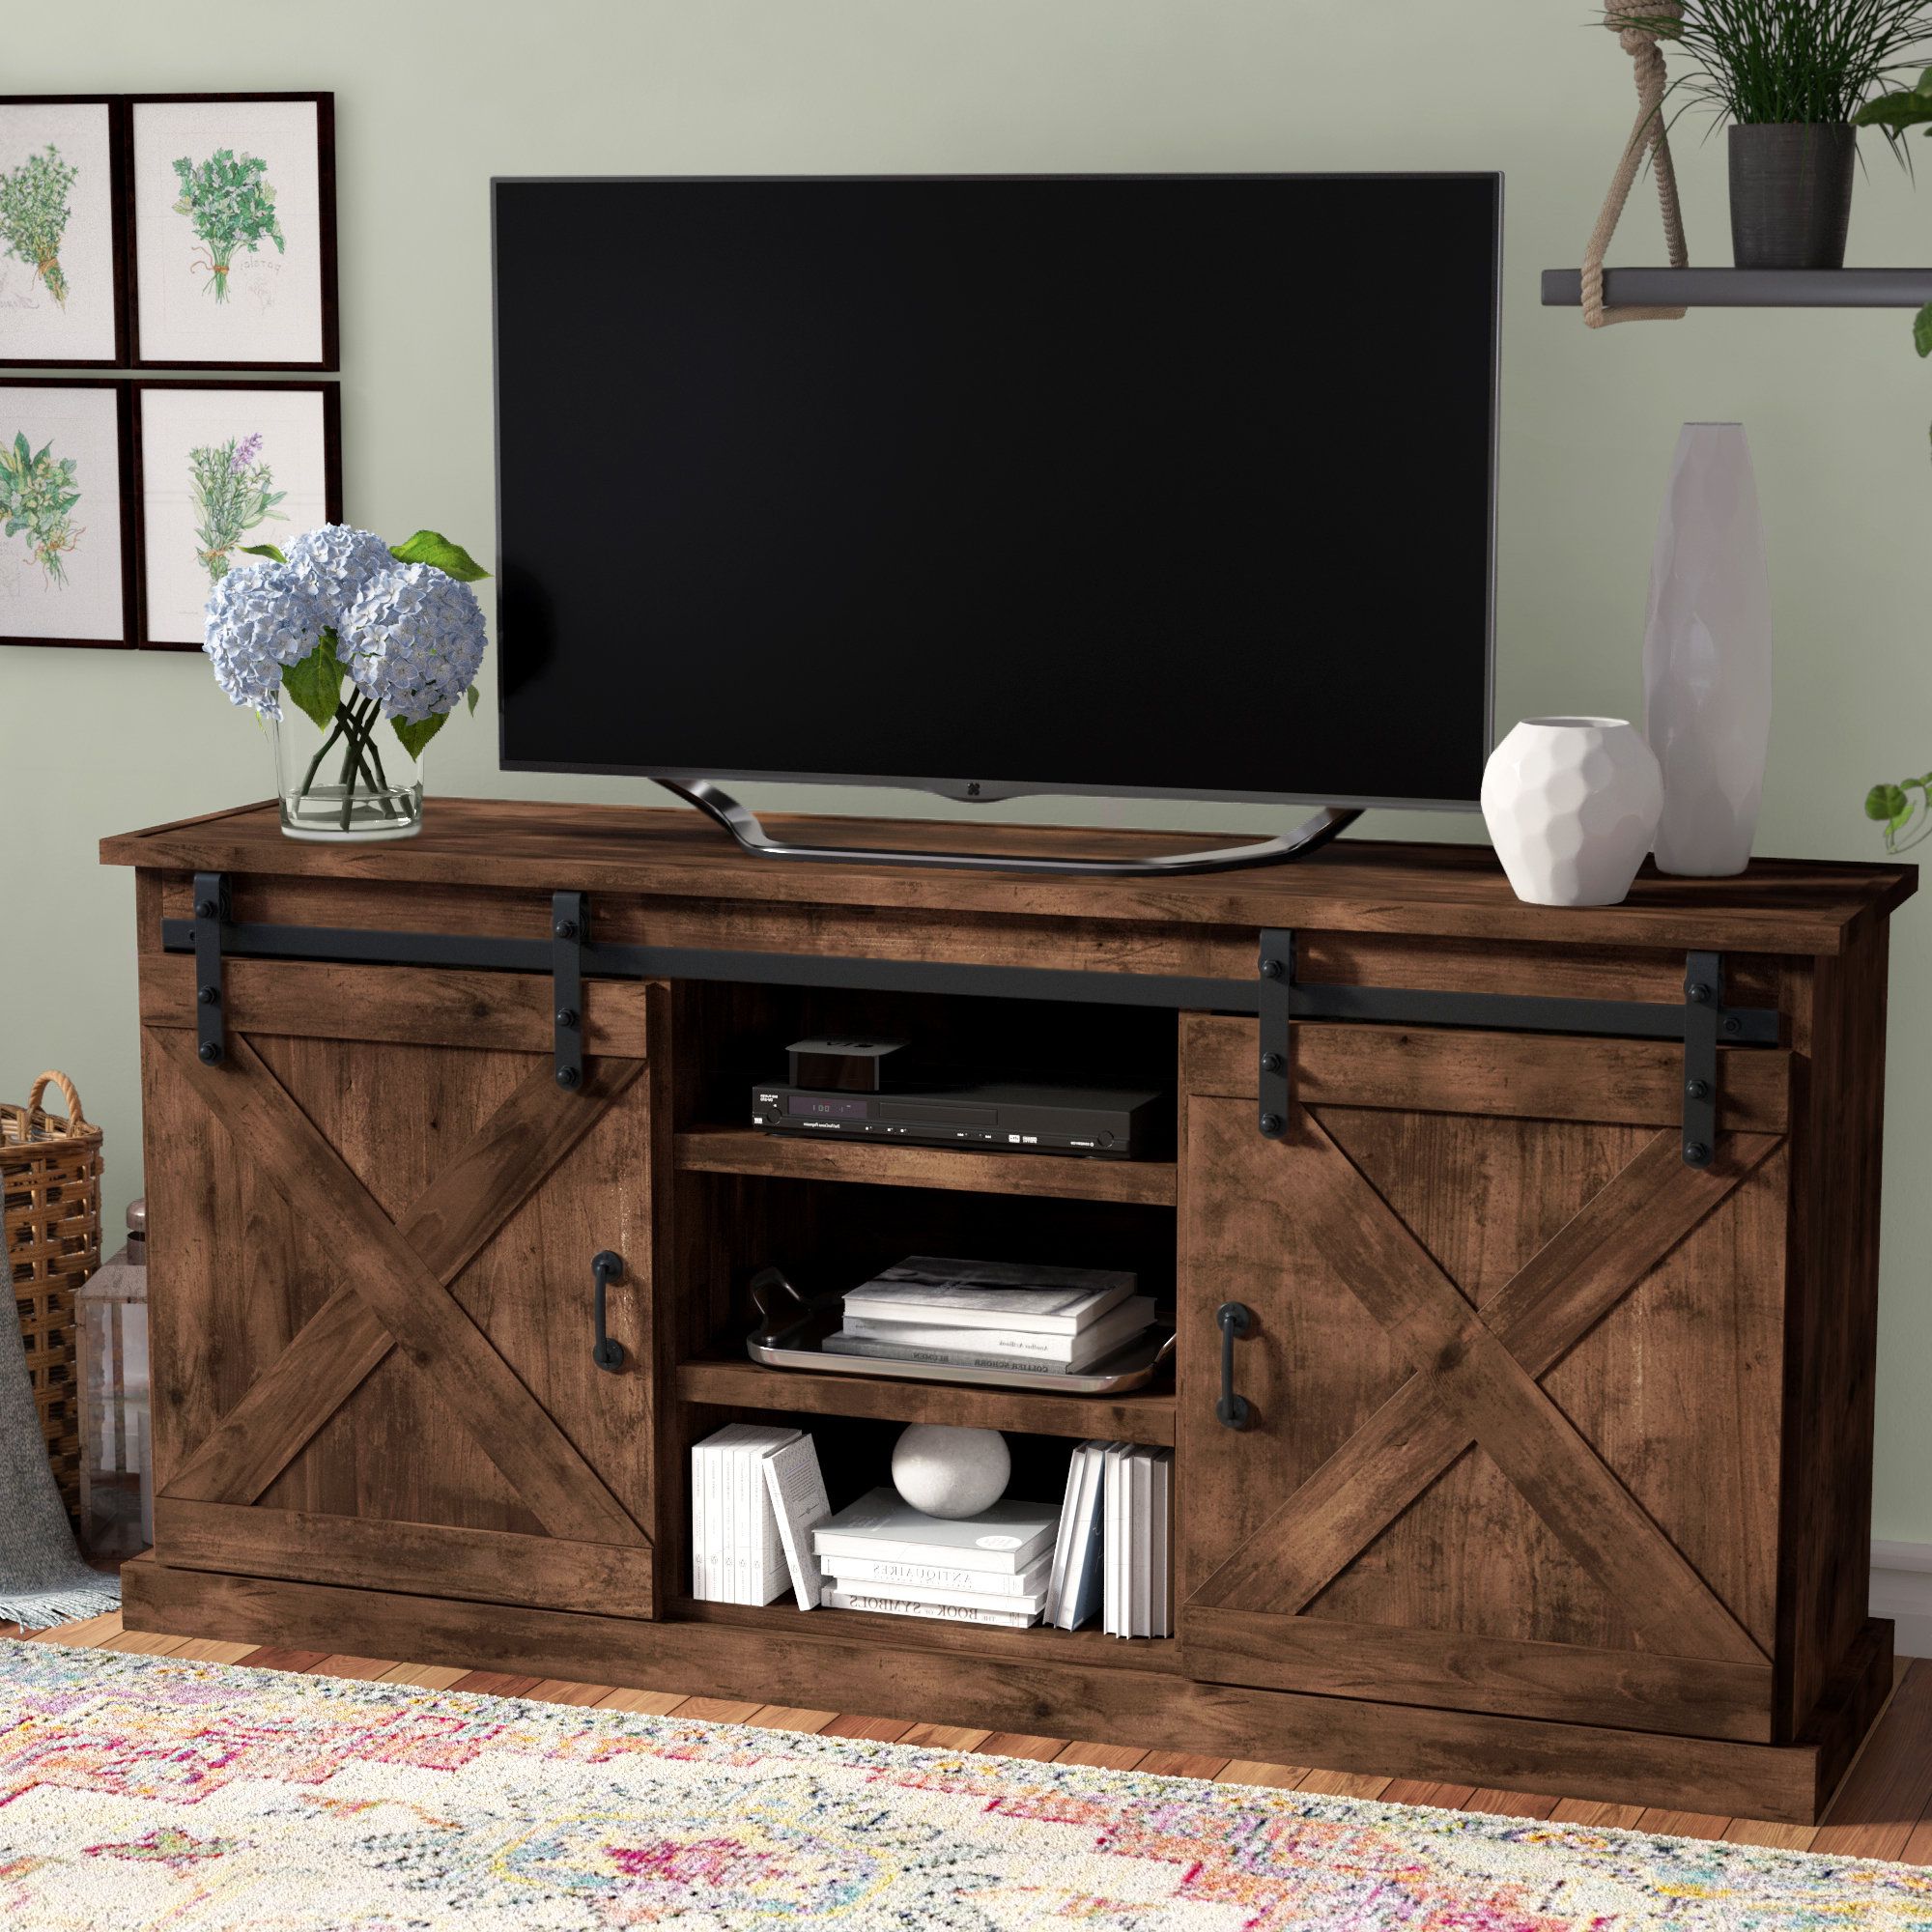 2017 Laurel Foundry Modern Farmhouse Clair Tv Stand For Tvs Up To 66 Regarding Casey Umber 66 Inch Tv Stands (Photo 1 of 20)